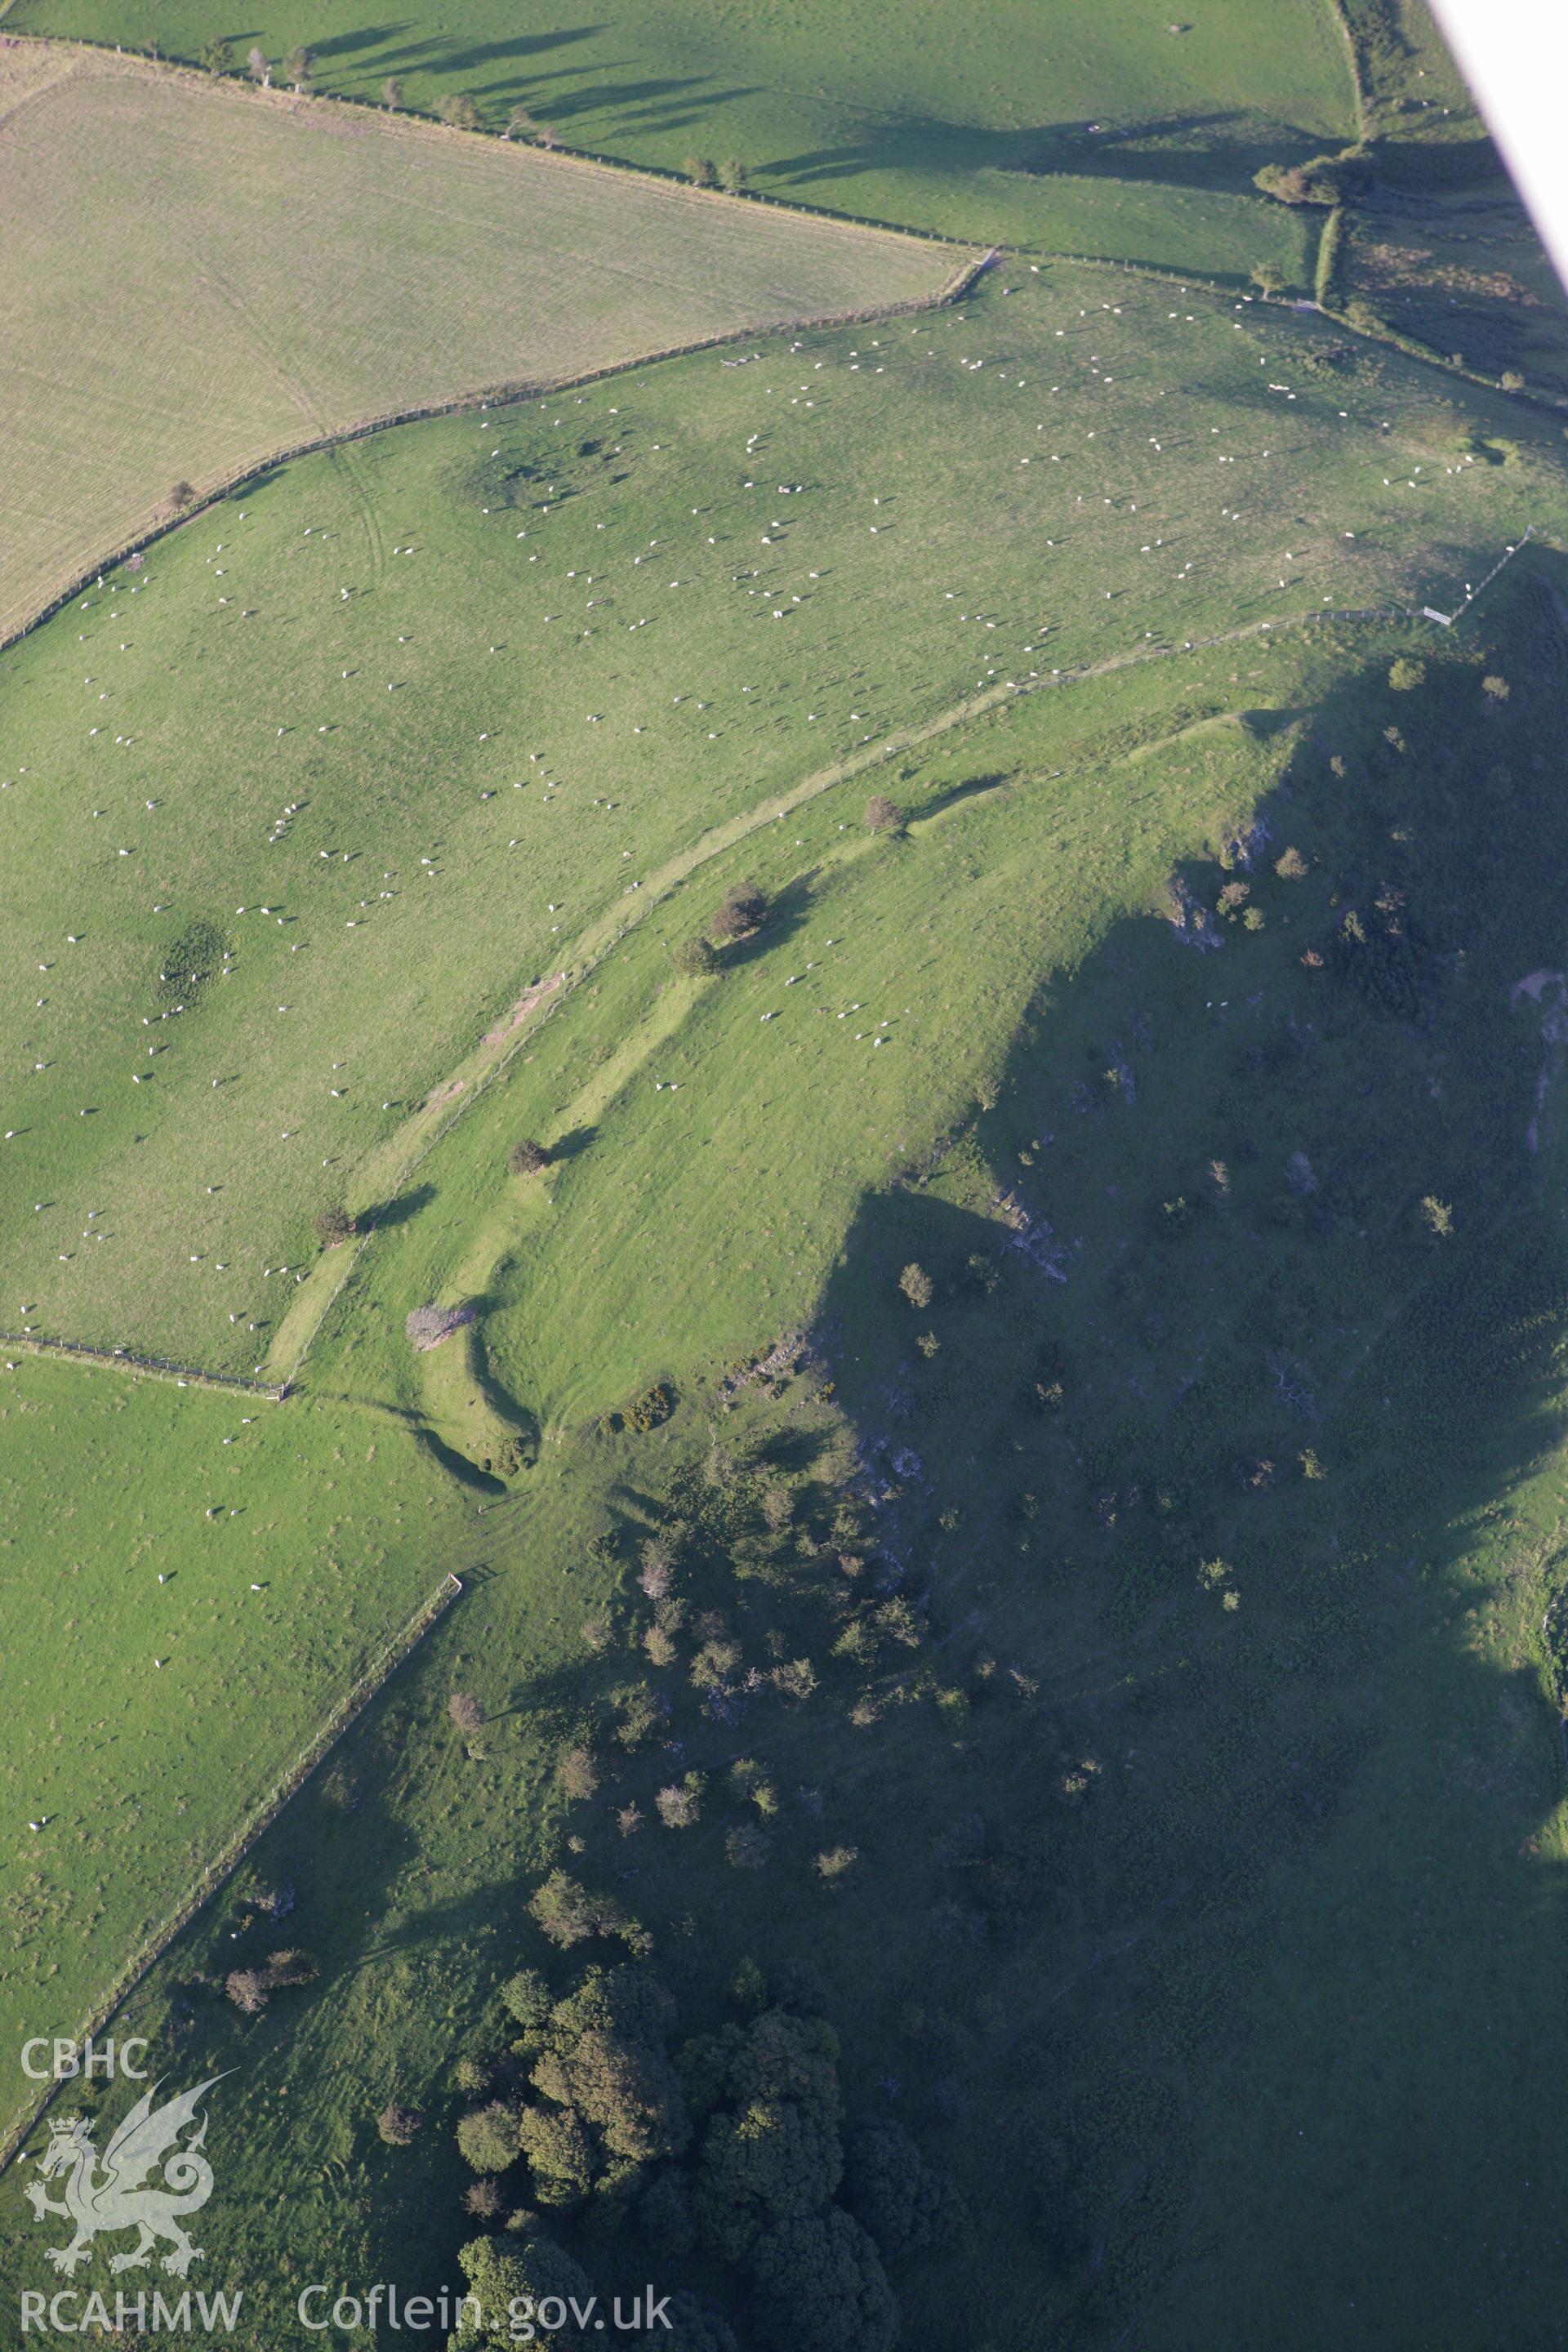 RCAHMW colour oblique aerial photograph of Gaer Fawr. Taken on 08 August 2007 by Toby Driver